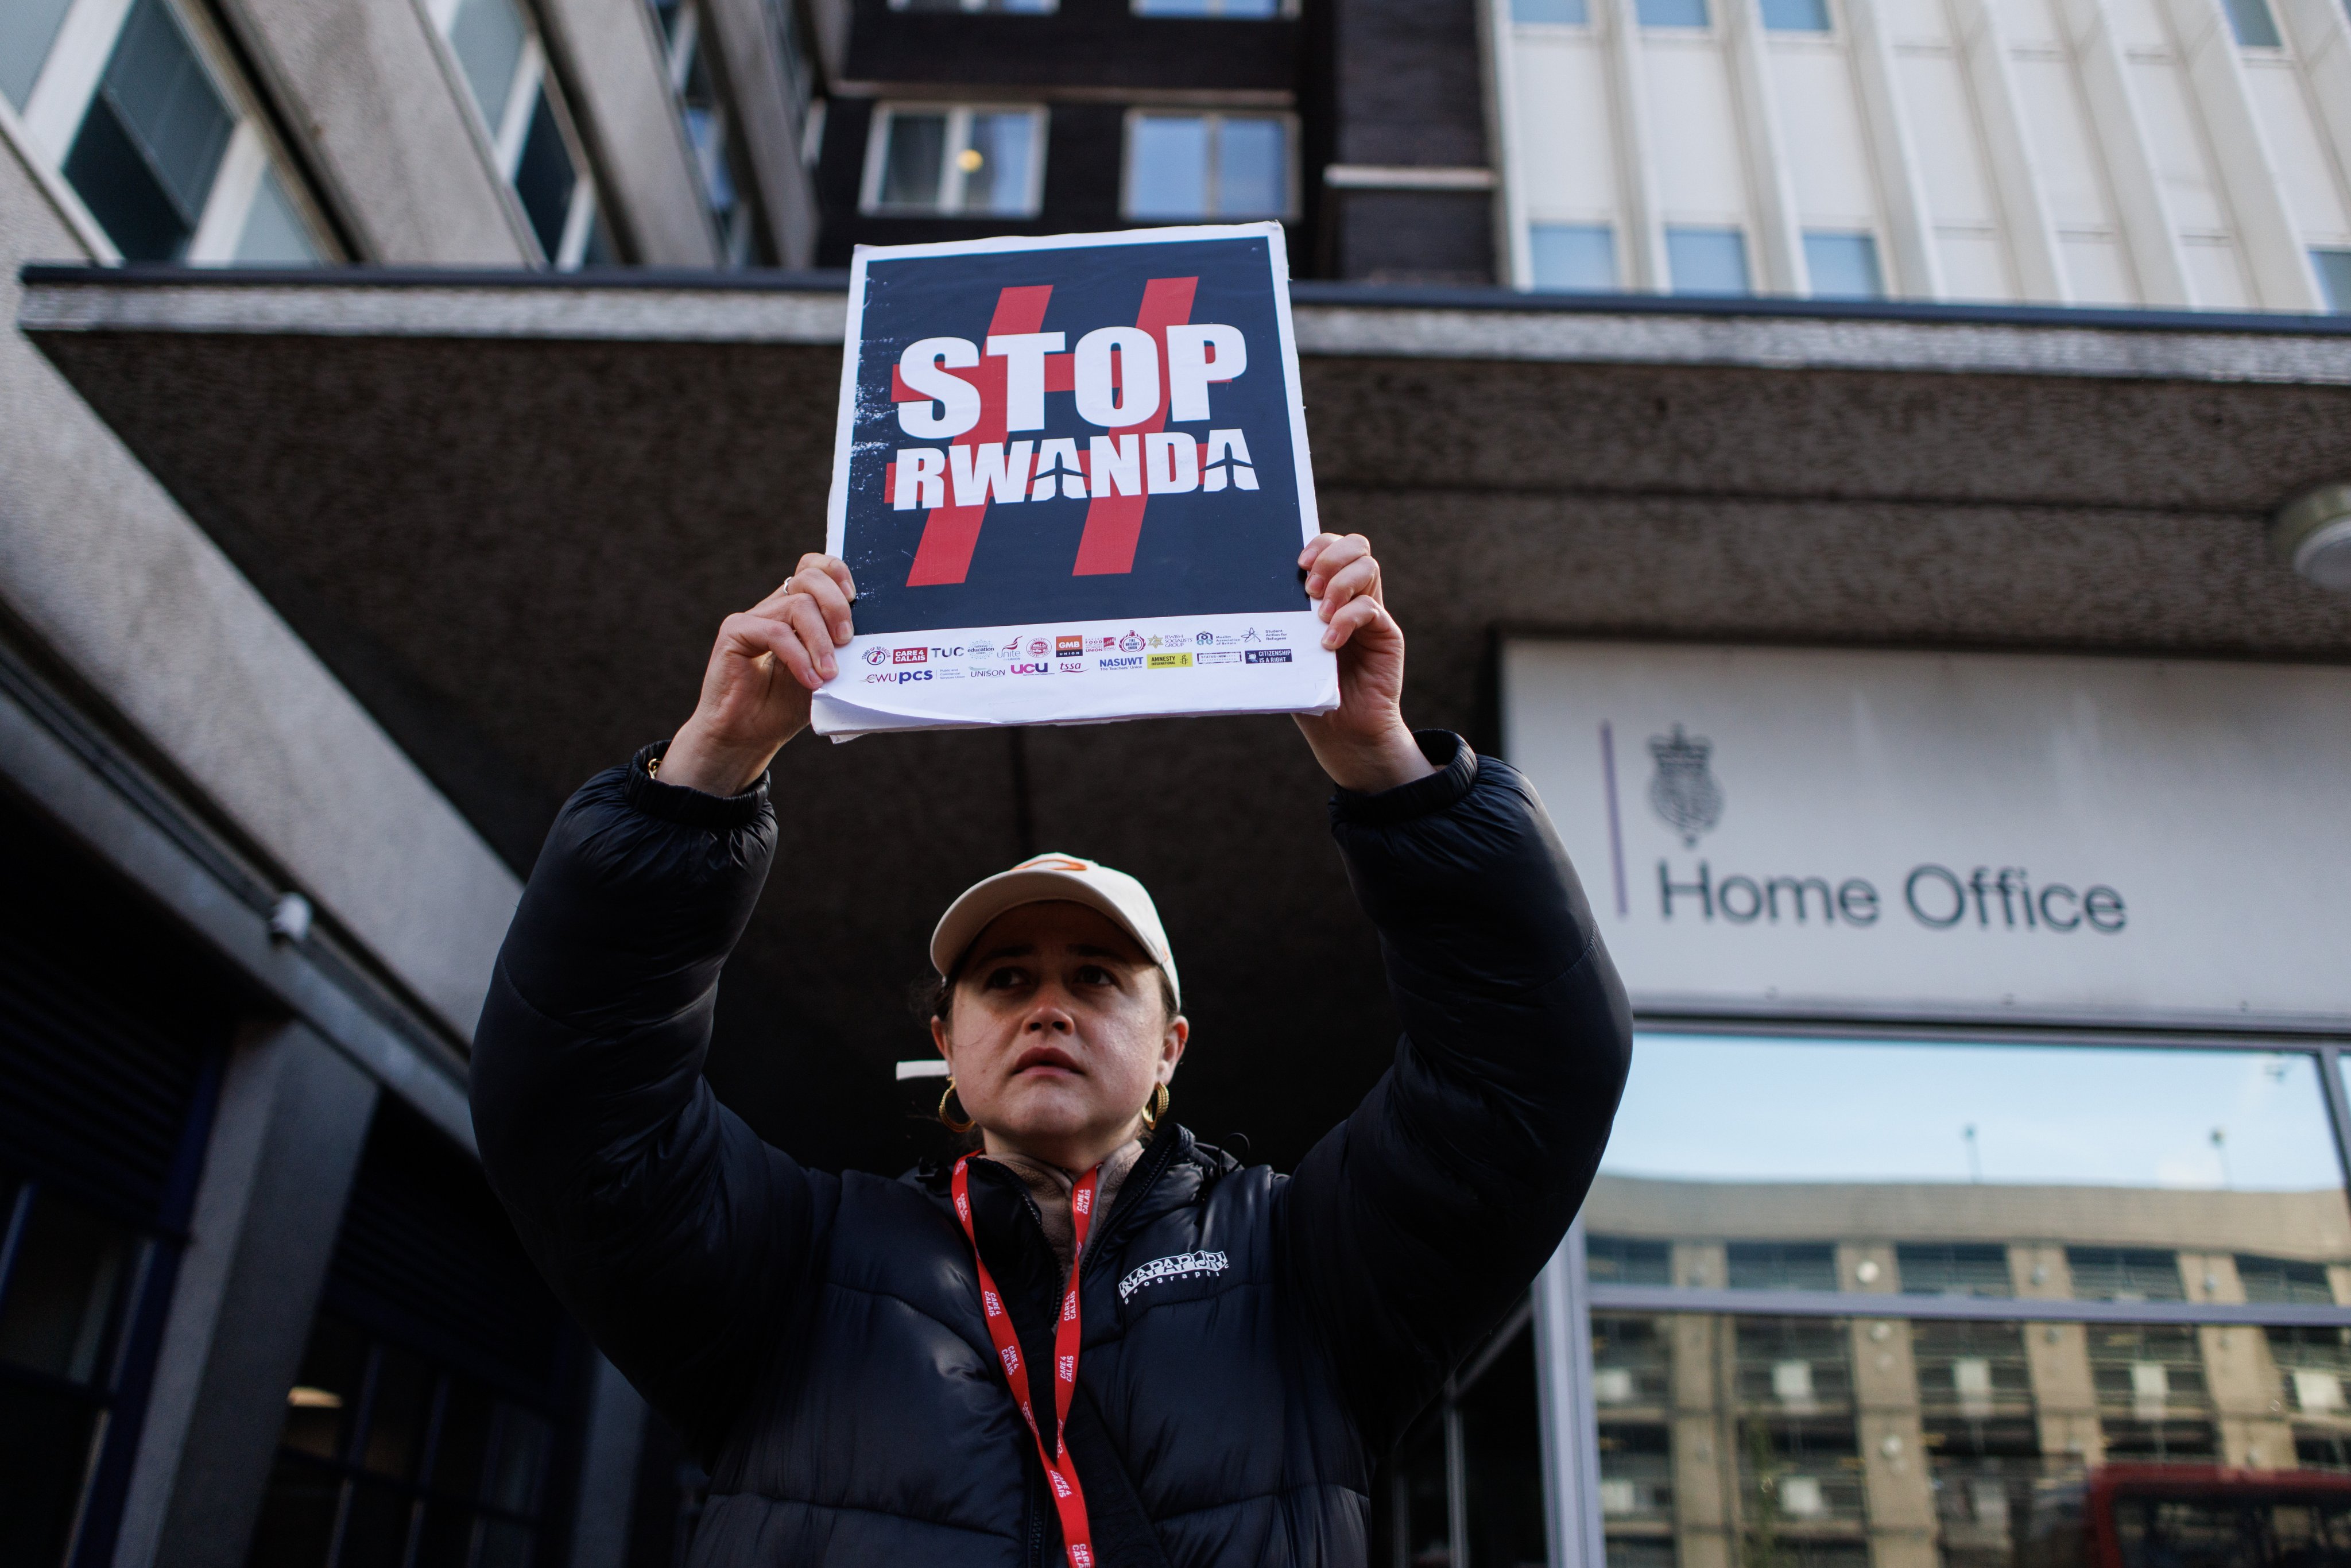 An activist protests against the British government’s Rwanda deportation scheme outside a Home Office immigration reporting centre in London on Monday. Photo: EPA-EFE